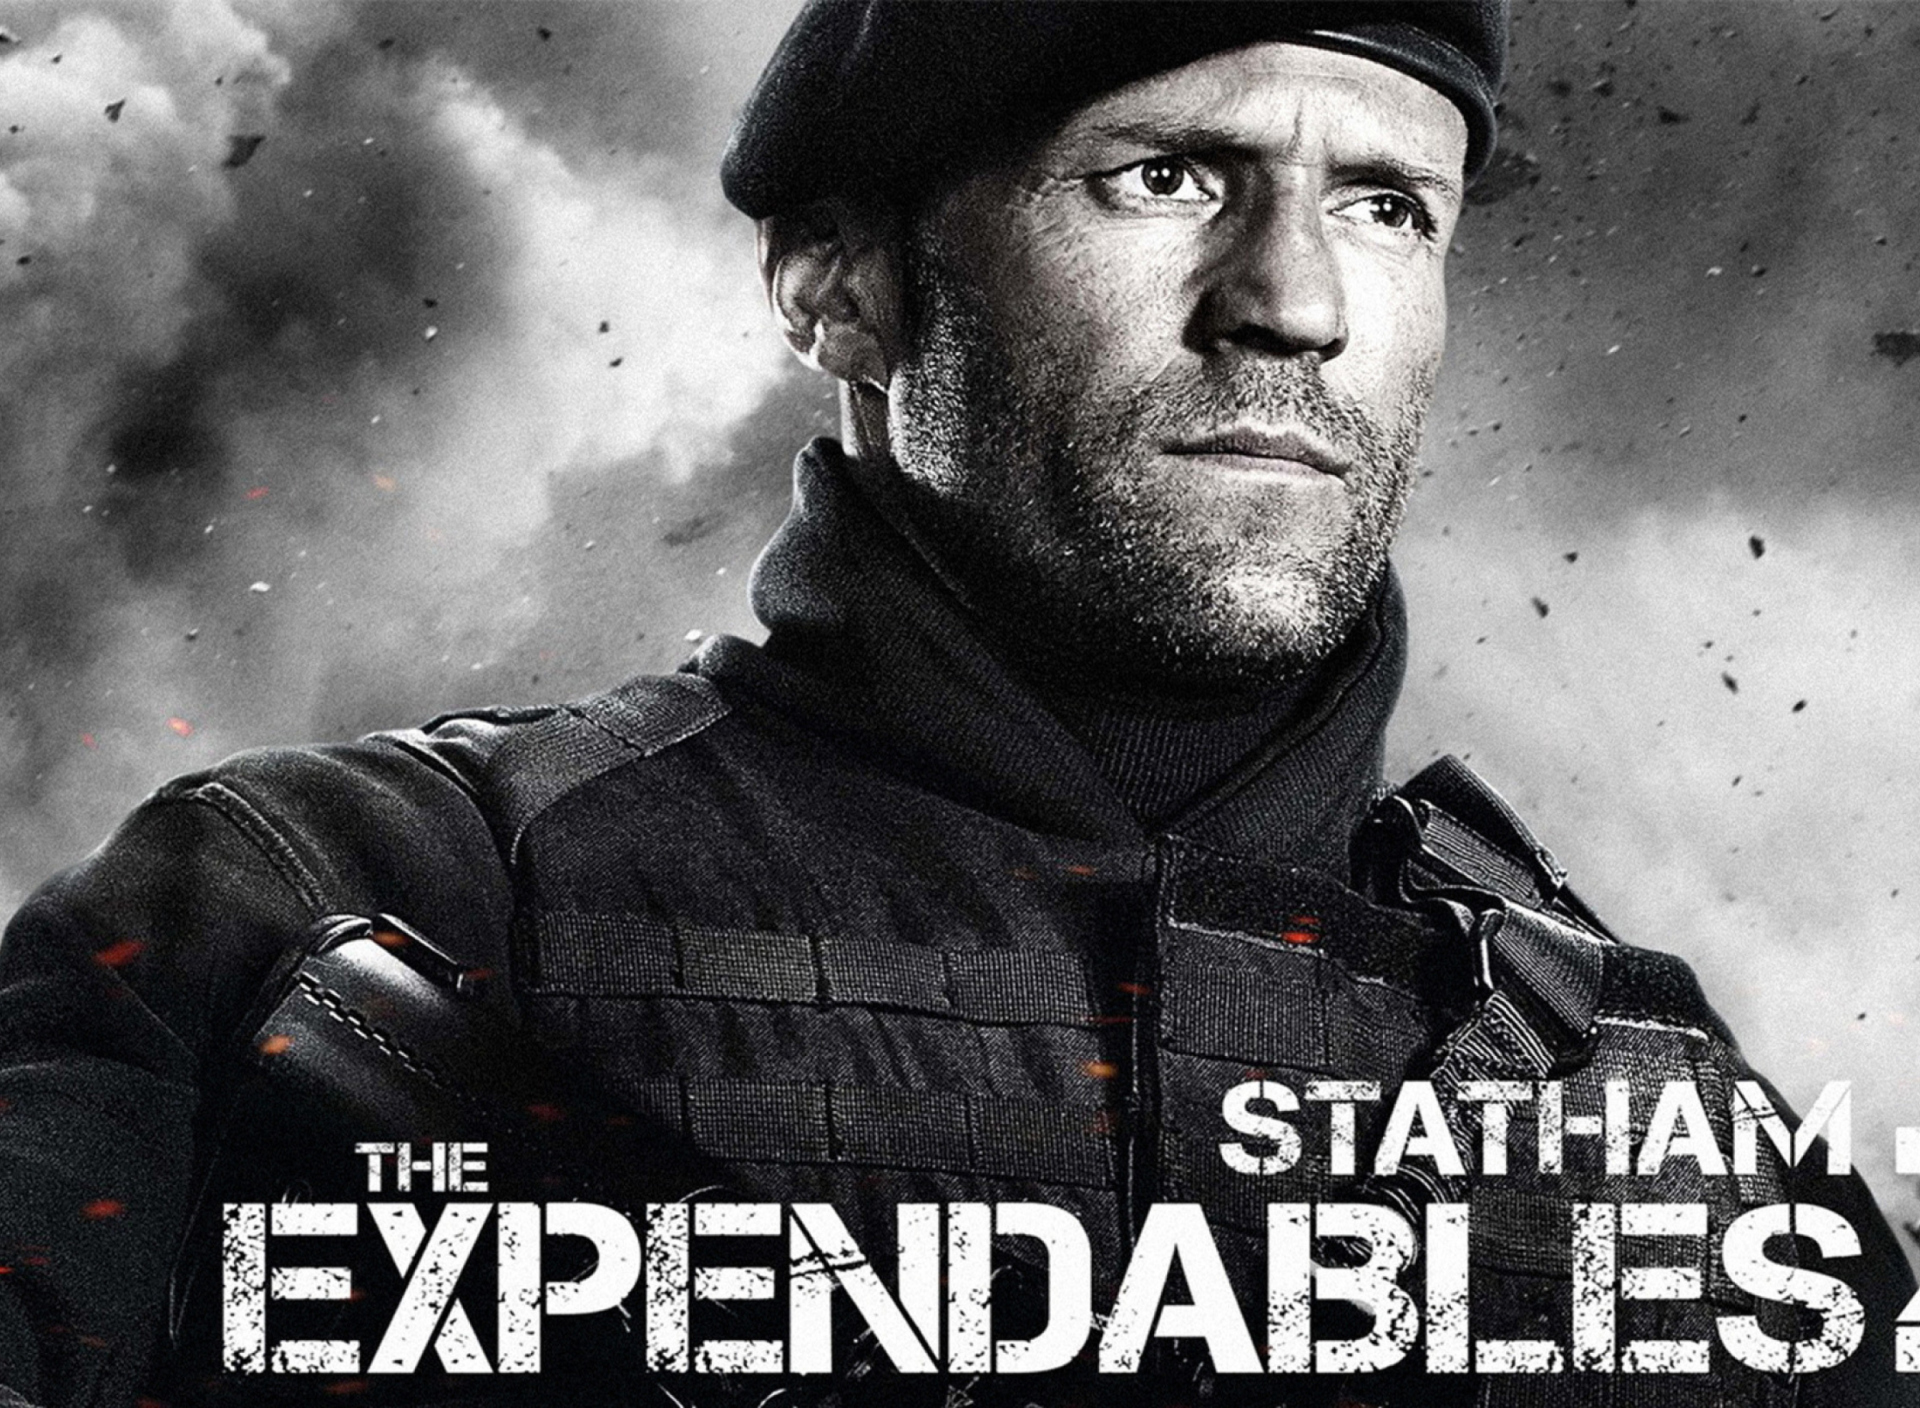 The Expendables 2 - Jason Statham wallpaper 1920x1408